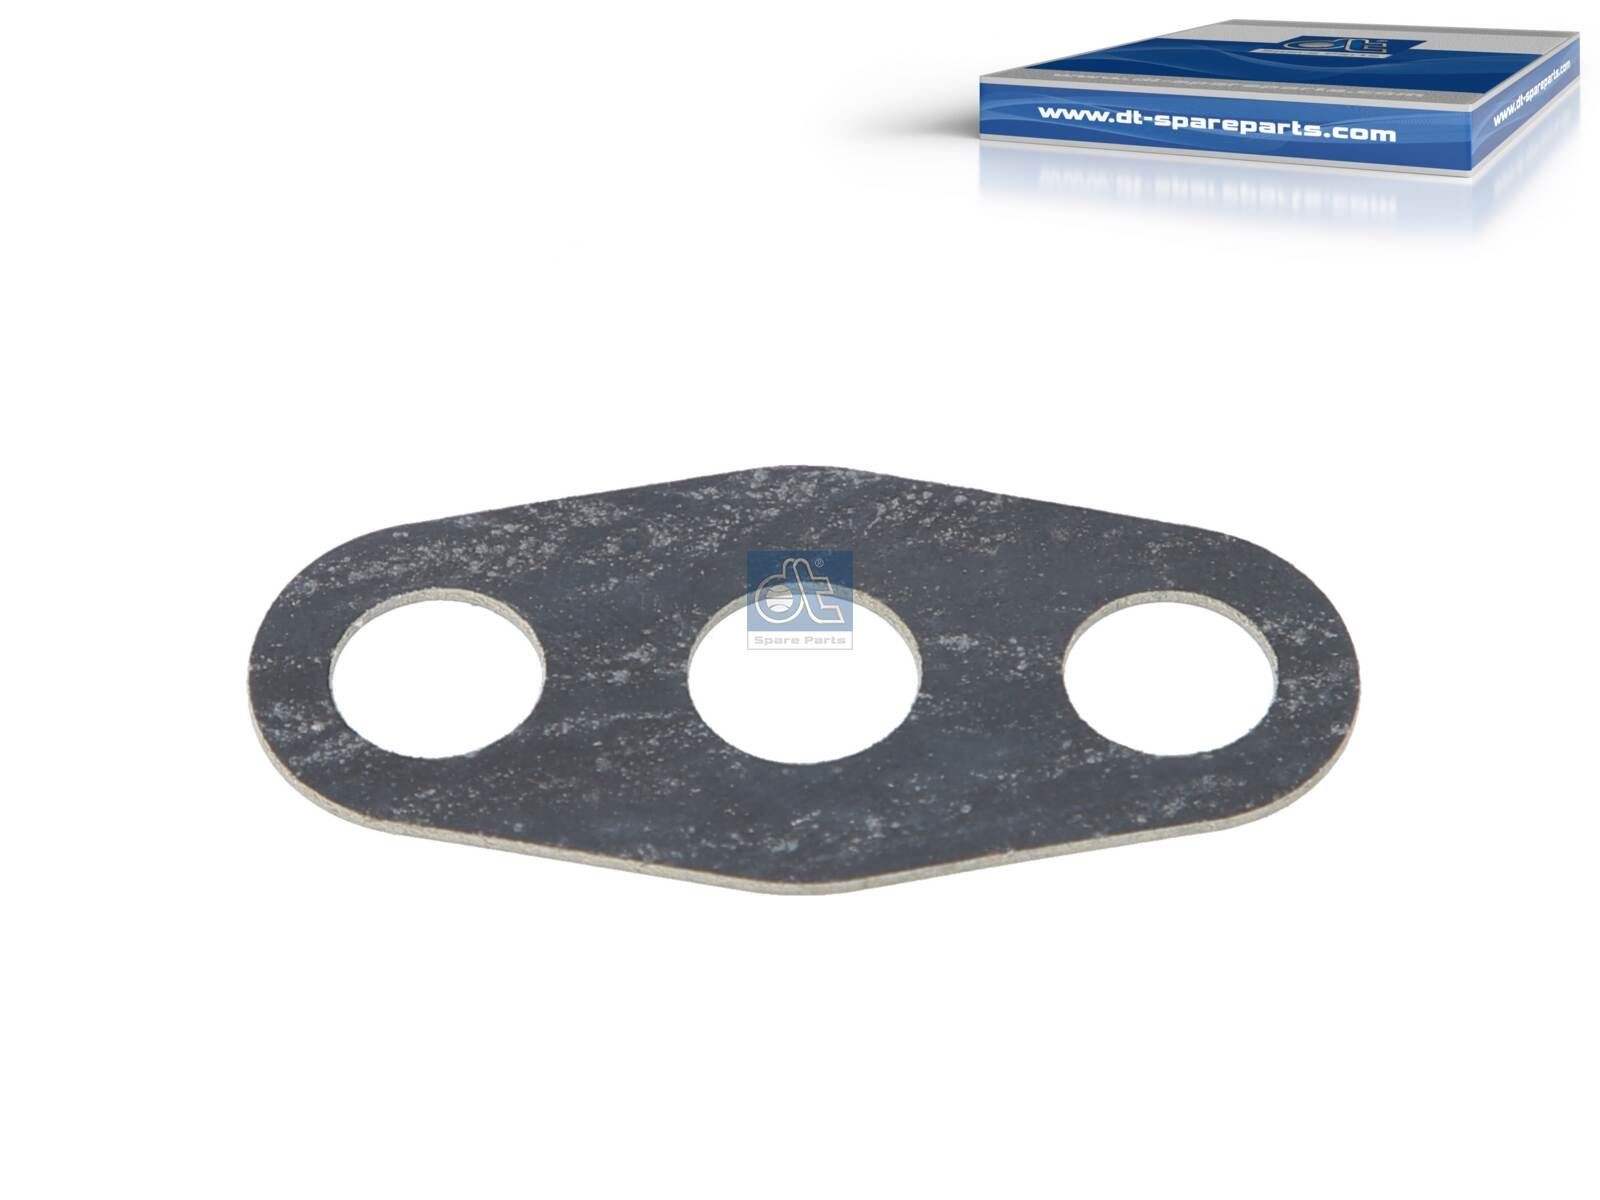 DT Spare Parts Turbo gasket 3.19100